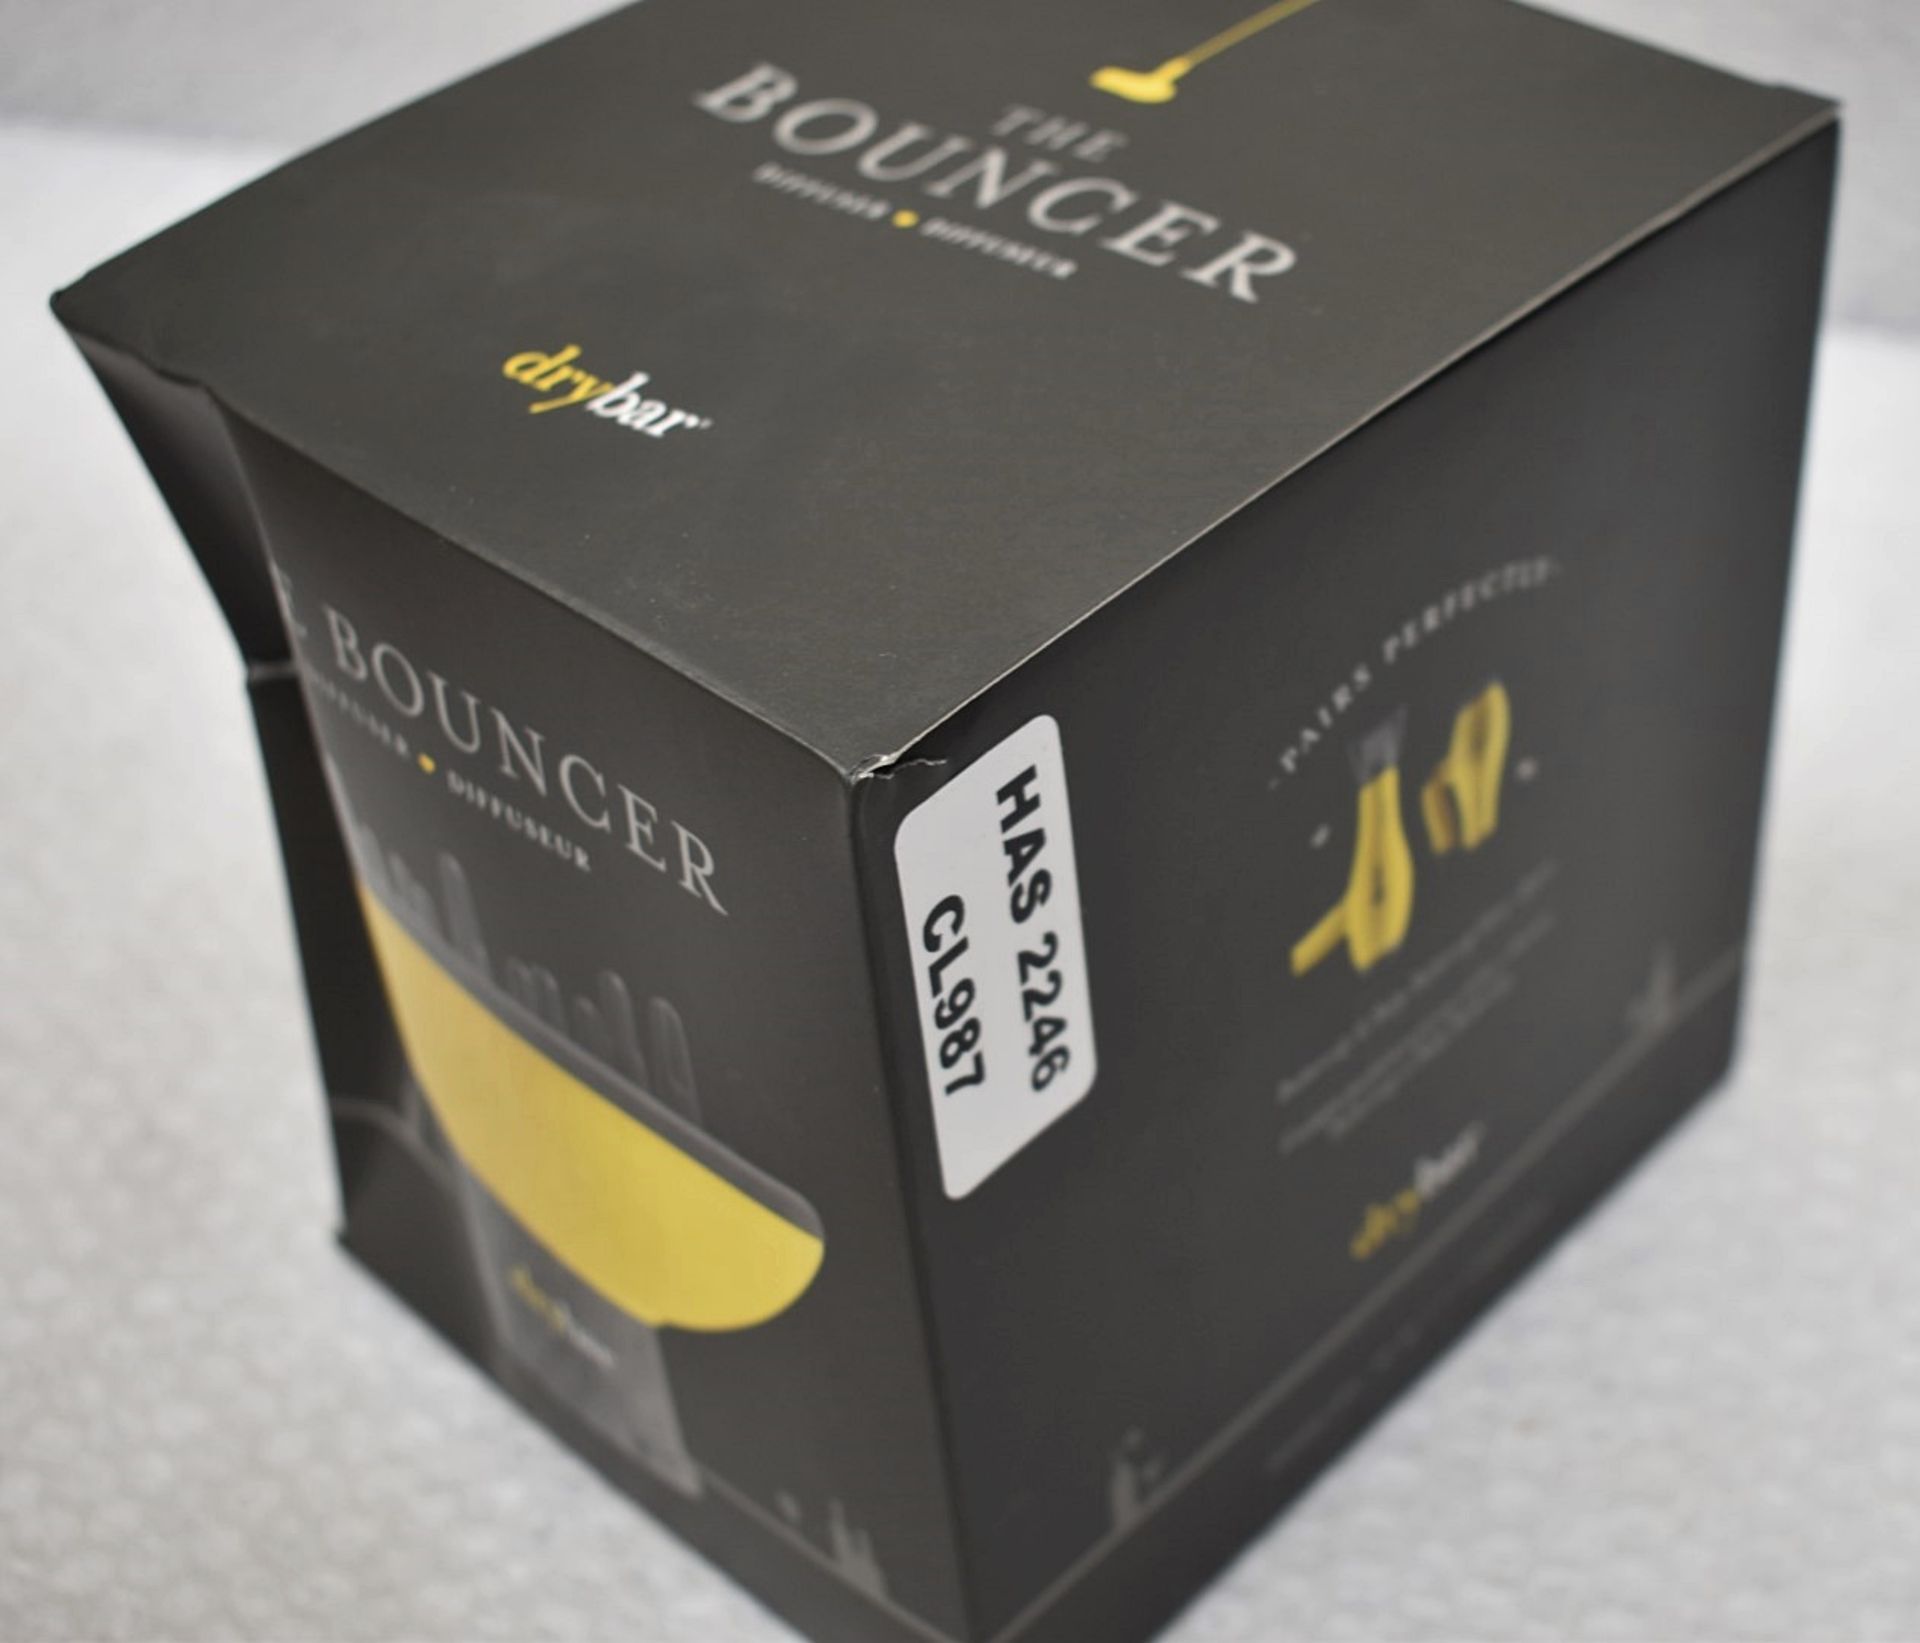 1 x DRYBAR The Bouncer Diffuser - Unused Boxed Stock - Ref: 6832450/HAS2246/WH2-C7/02-23-2 - CL987 - - Image 2 of 9